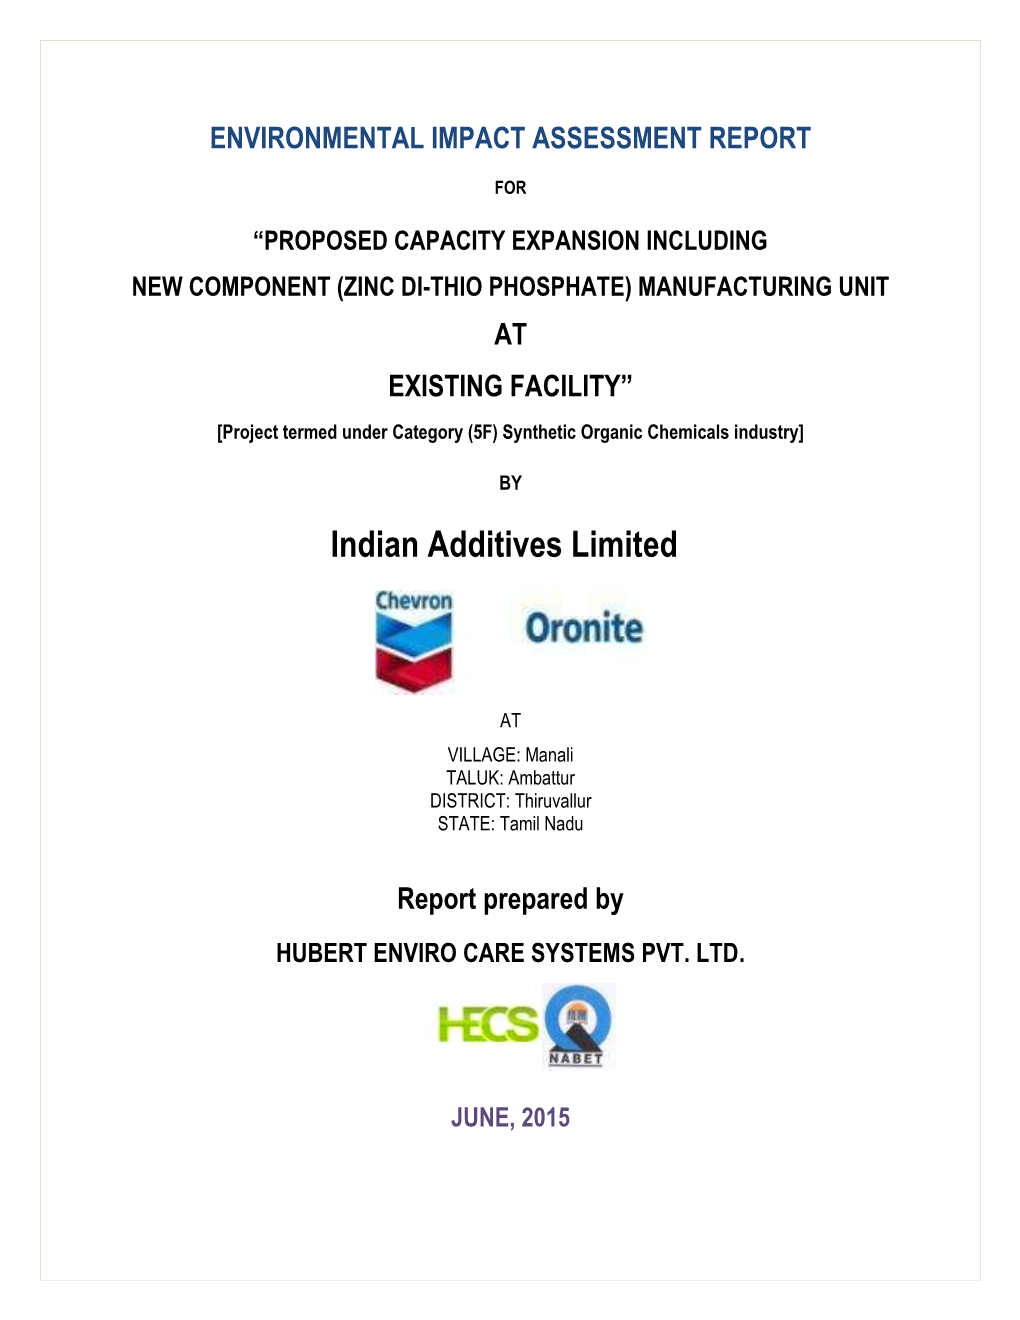 Indian Additives Limited